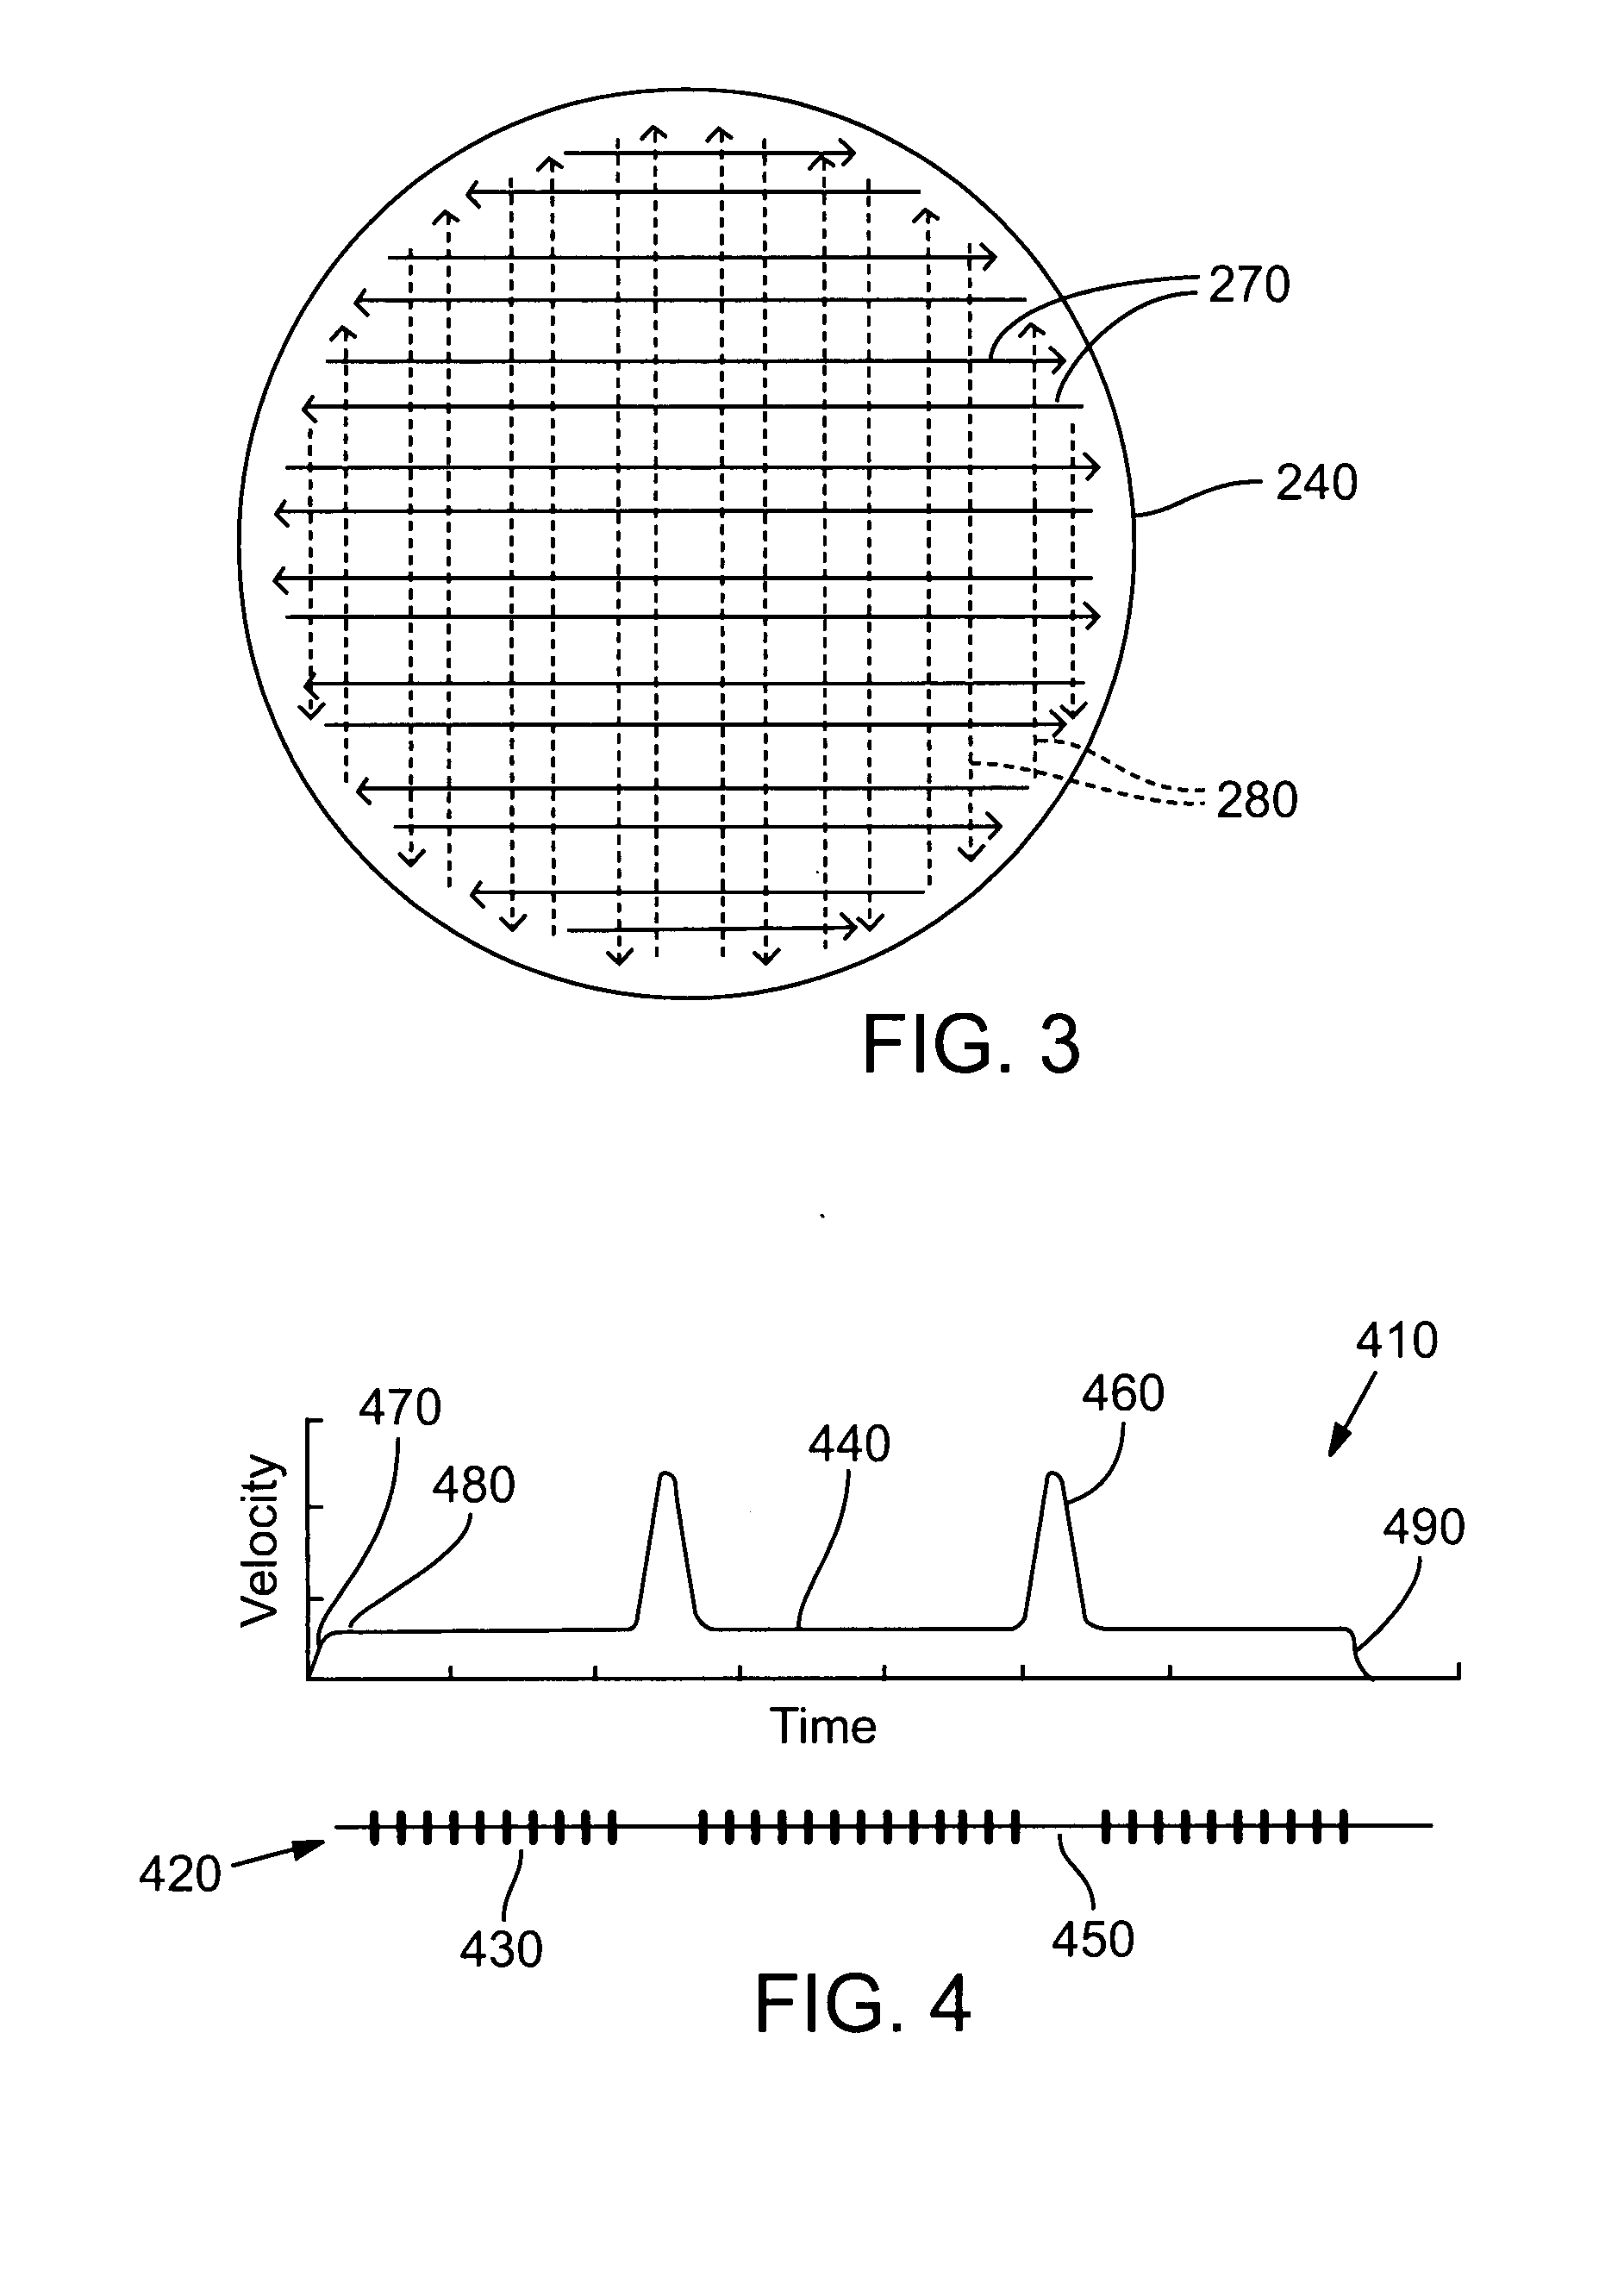 Systems and methods for semiconductor structure processing using multiple laser beam spots